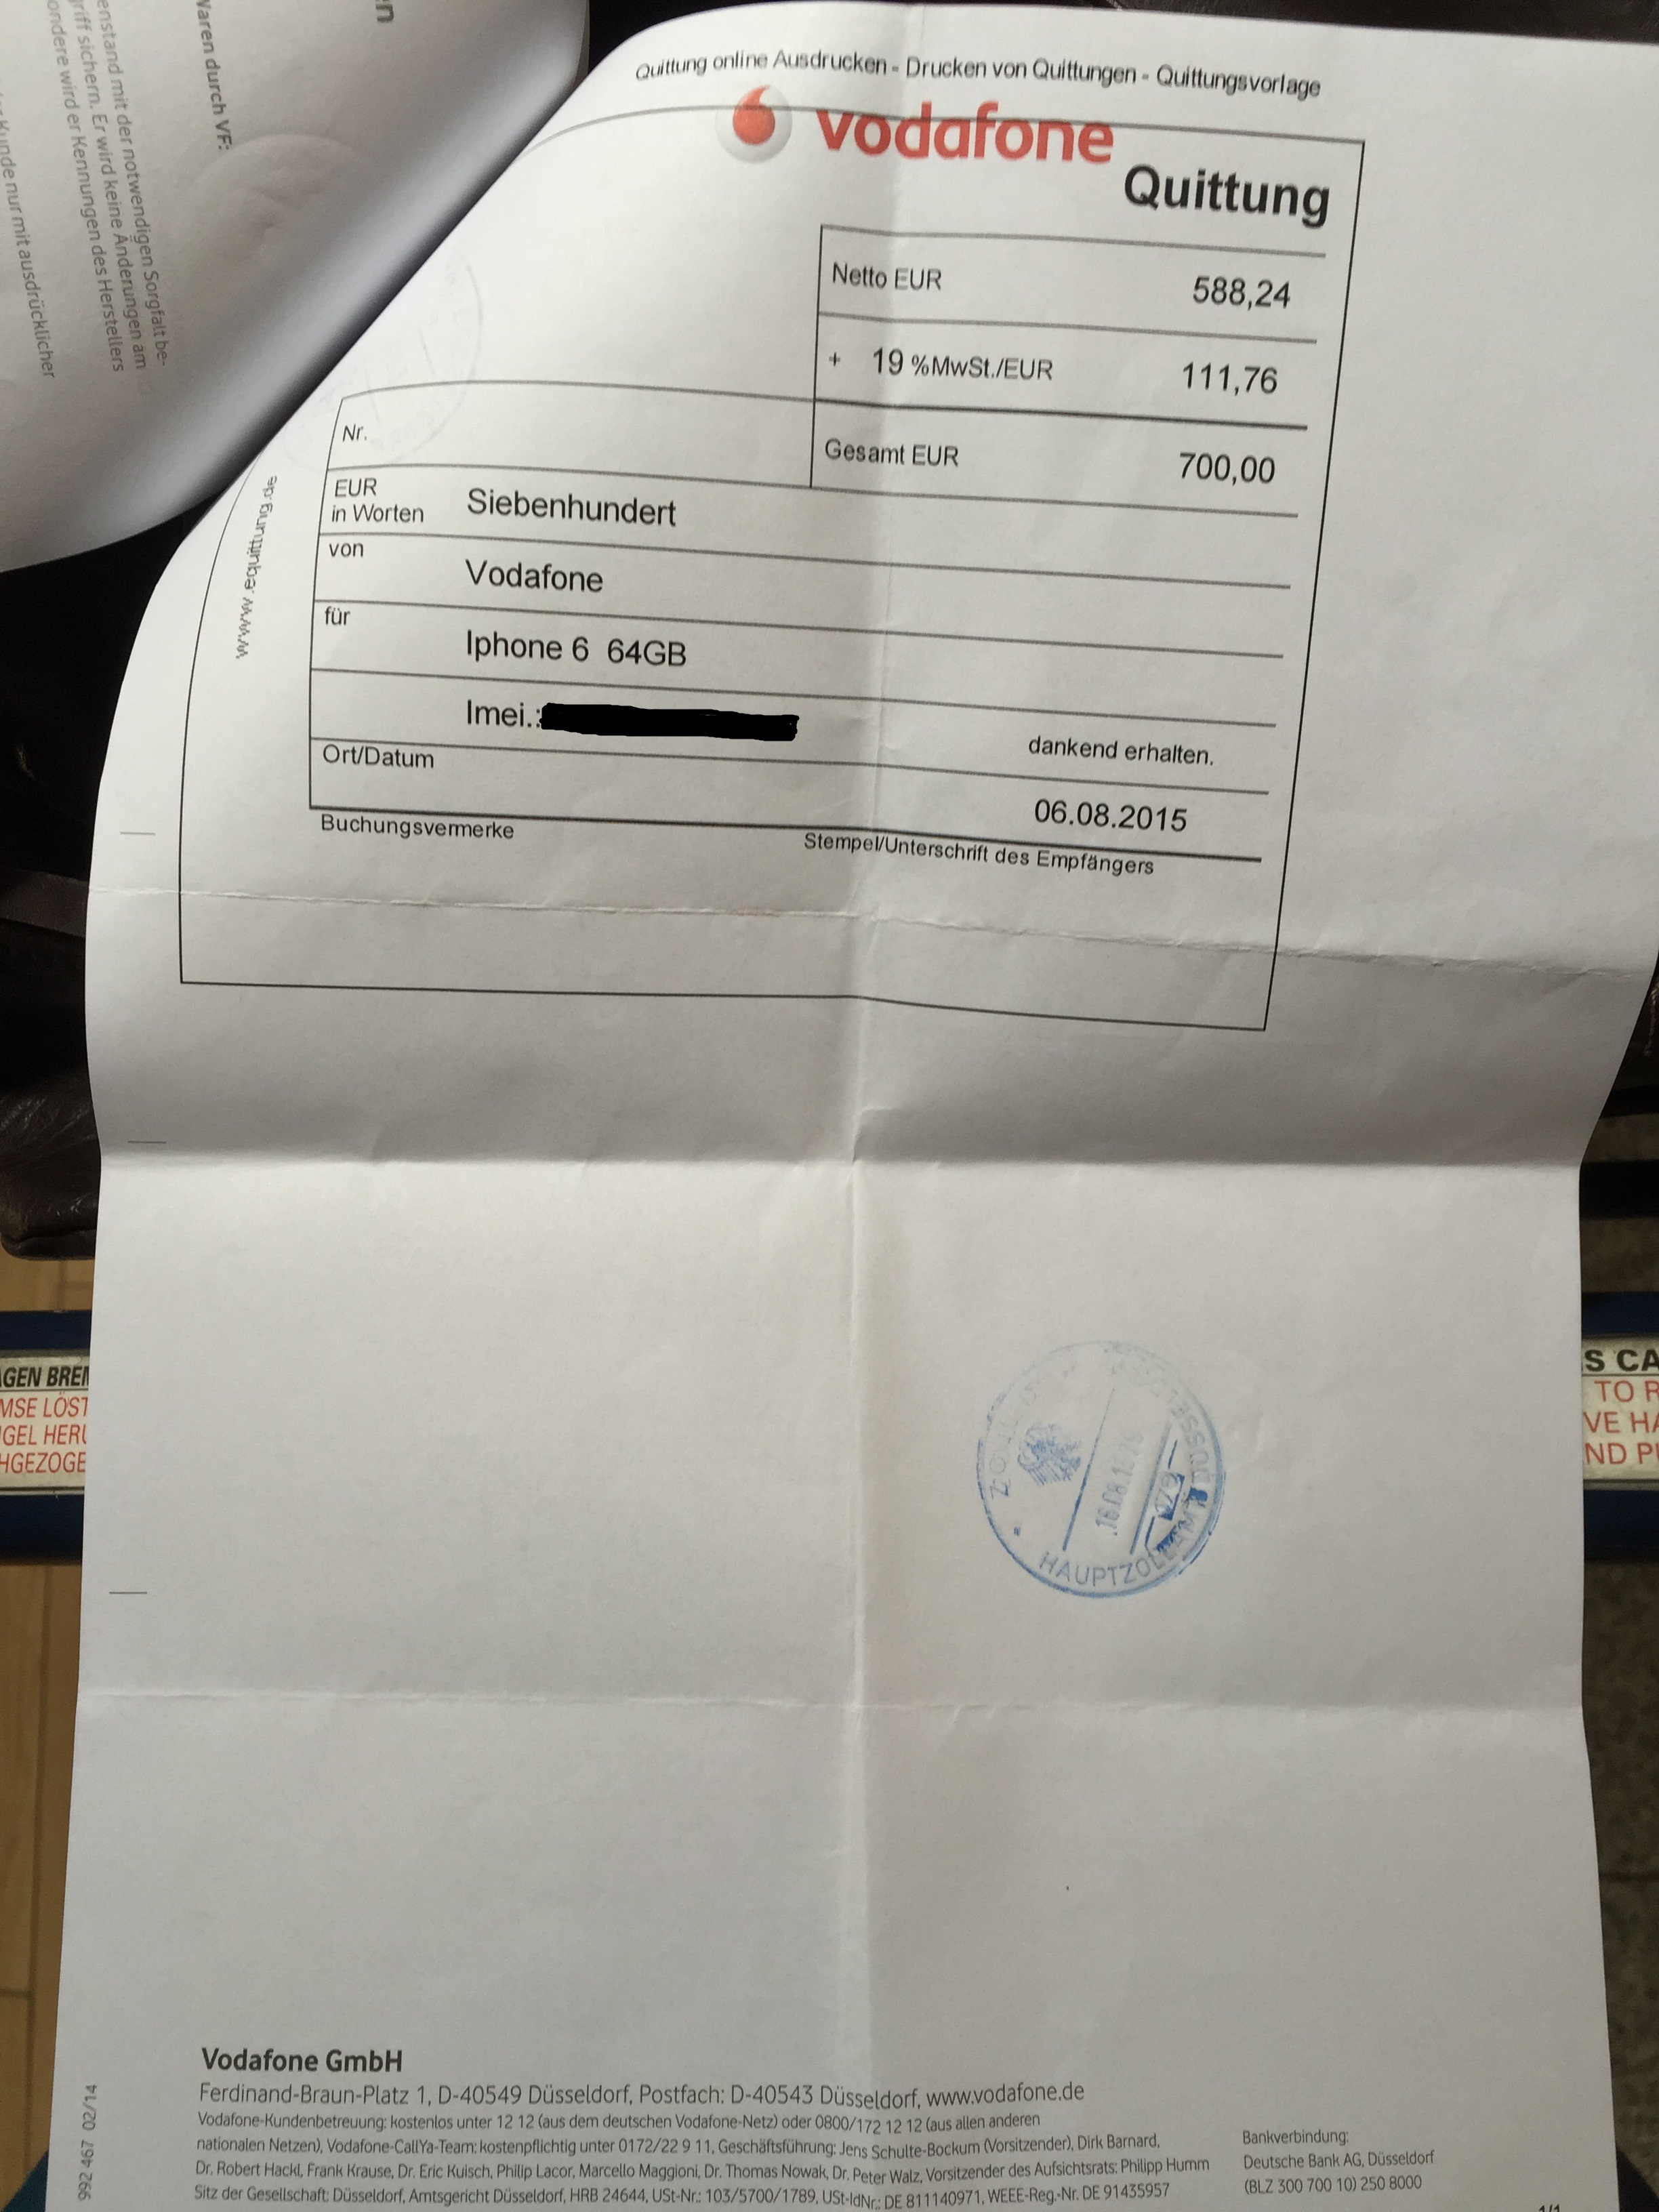 Complain for not getting my iPhone 6 Tax back at t... - Vodafone Community